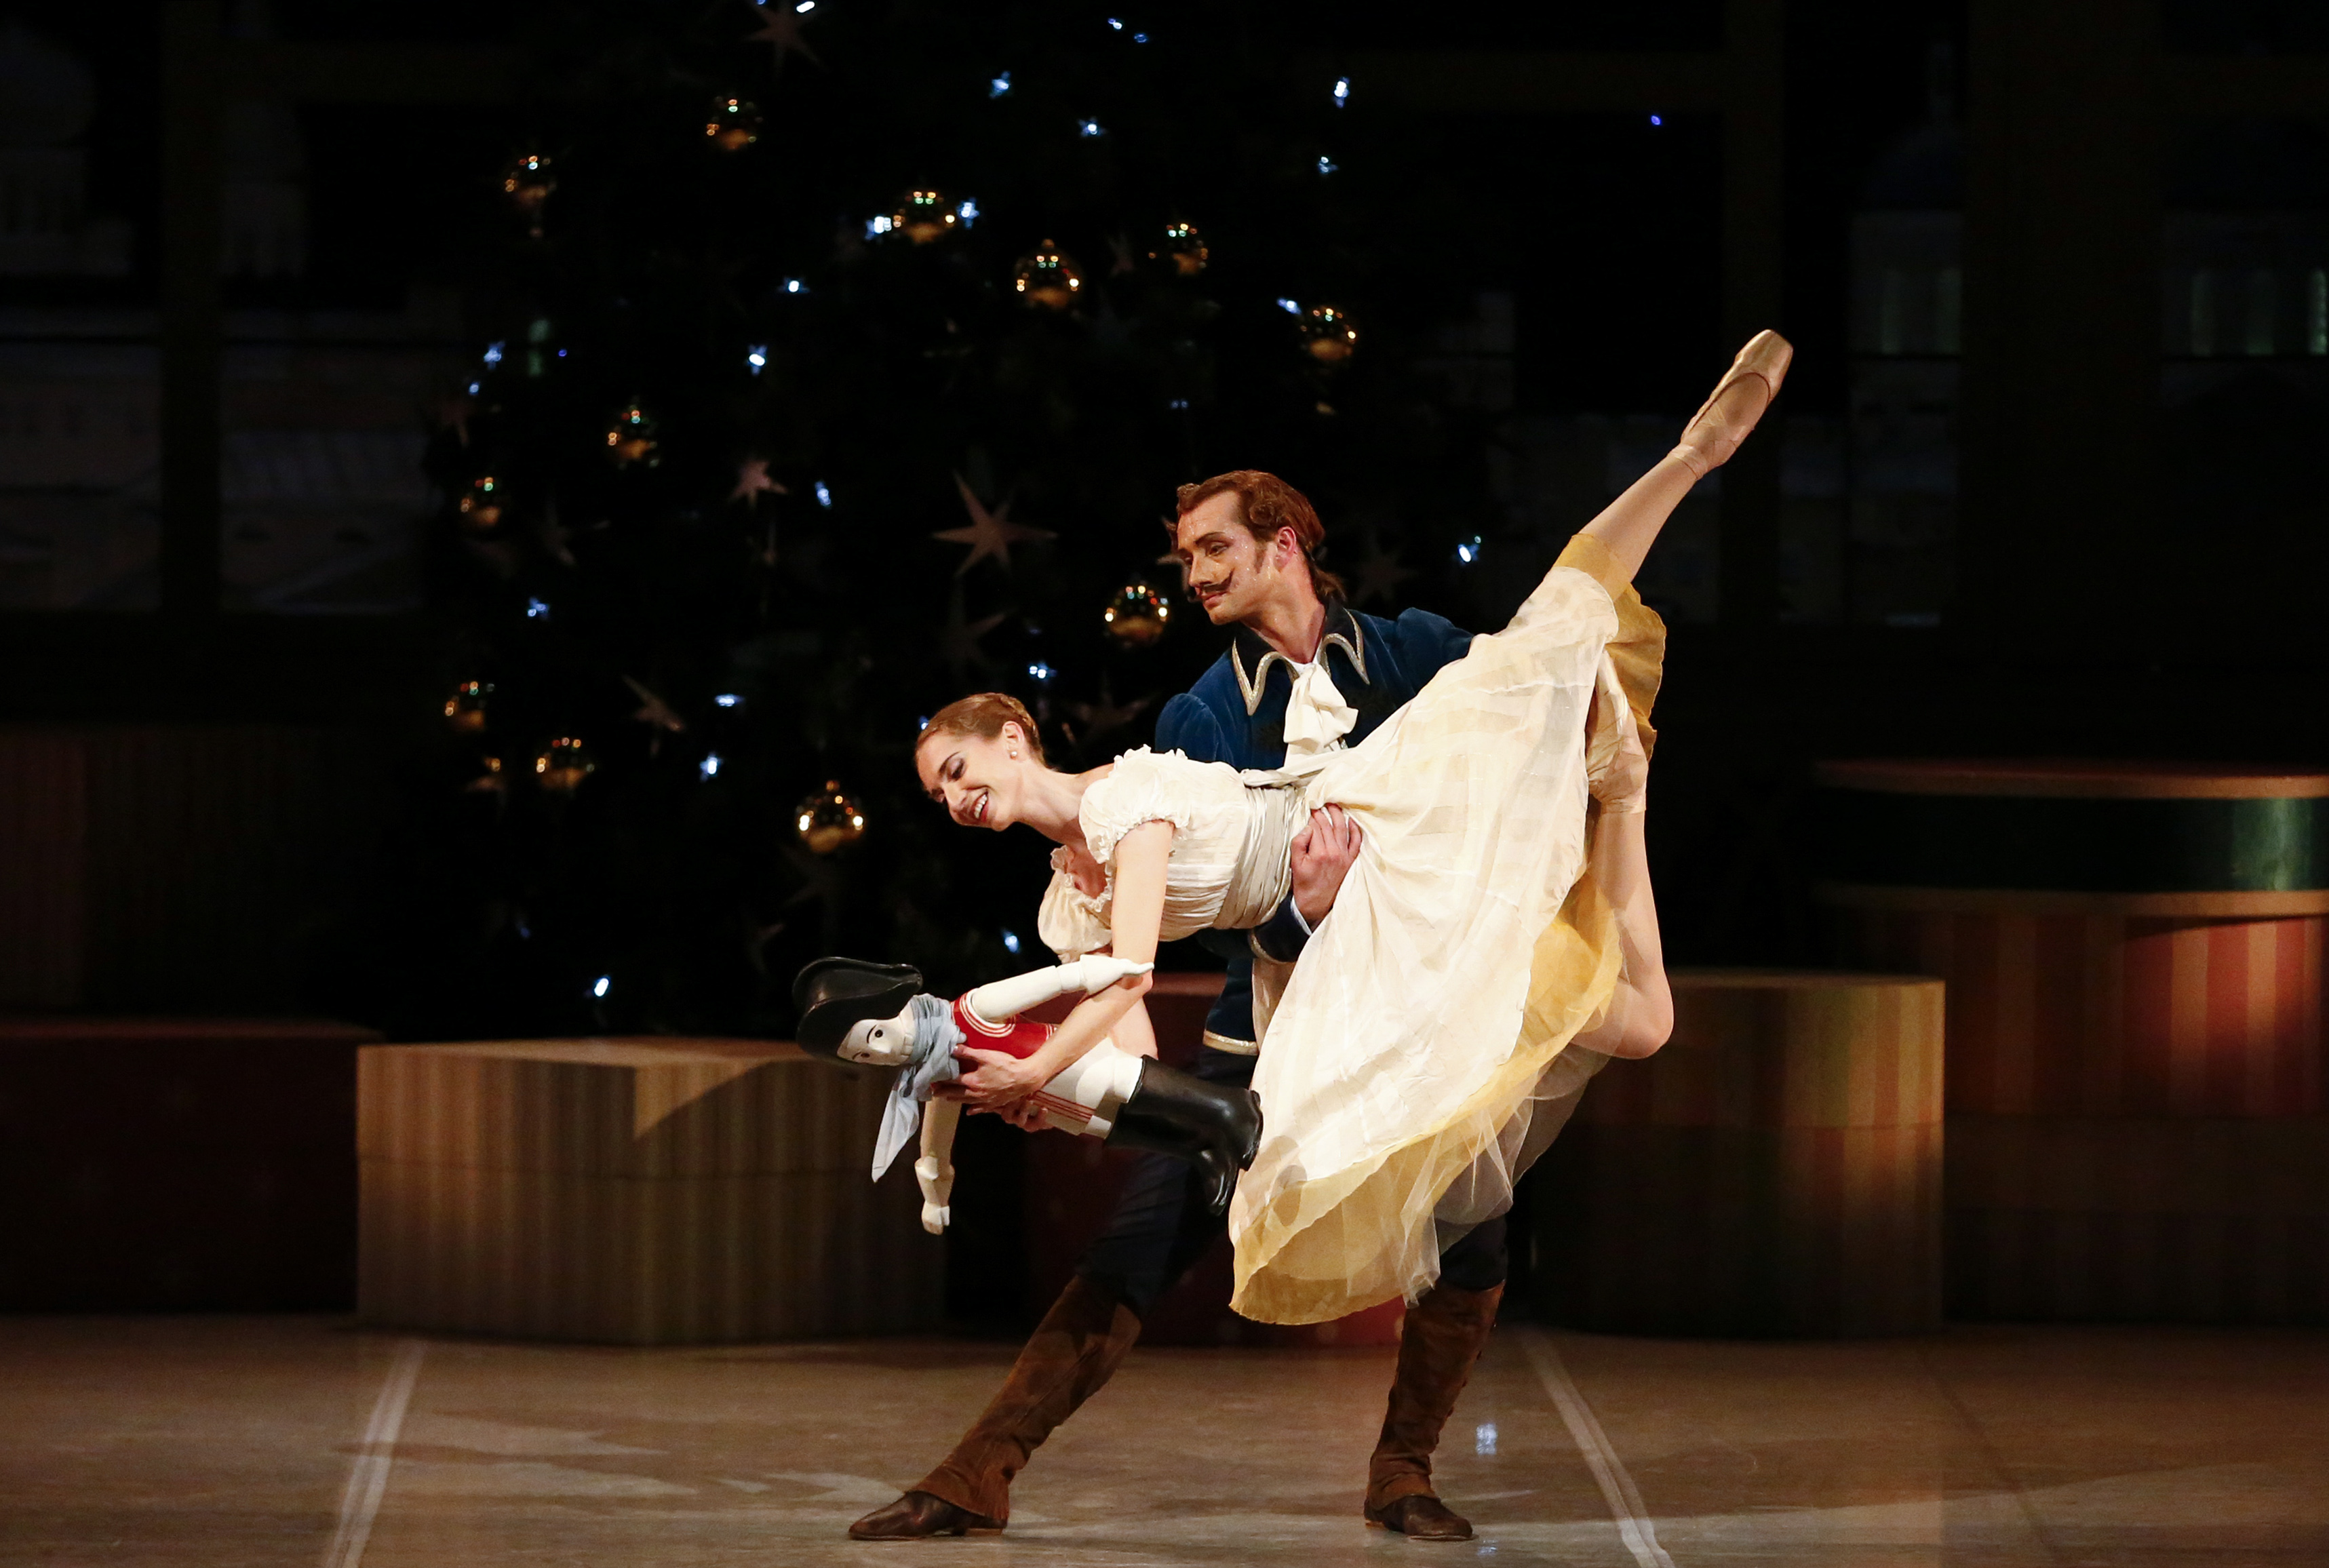 The Nutcracker performed in Russia.